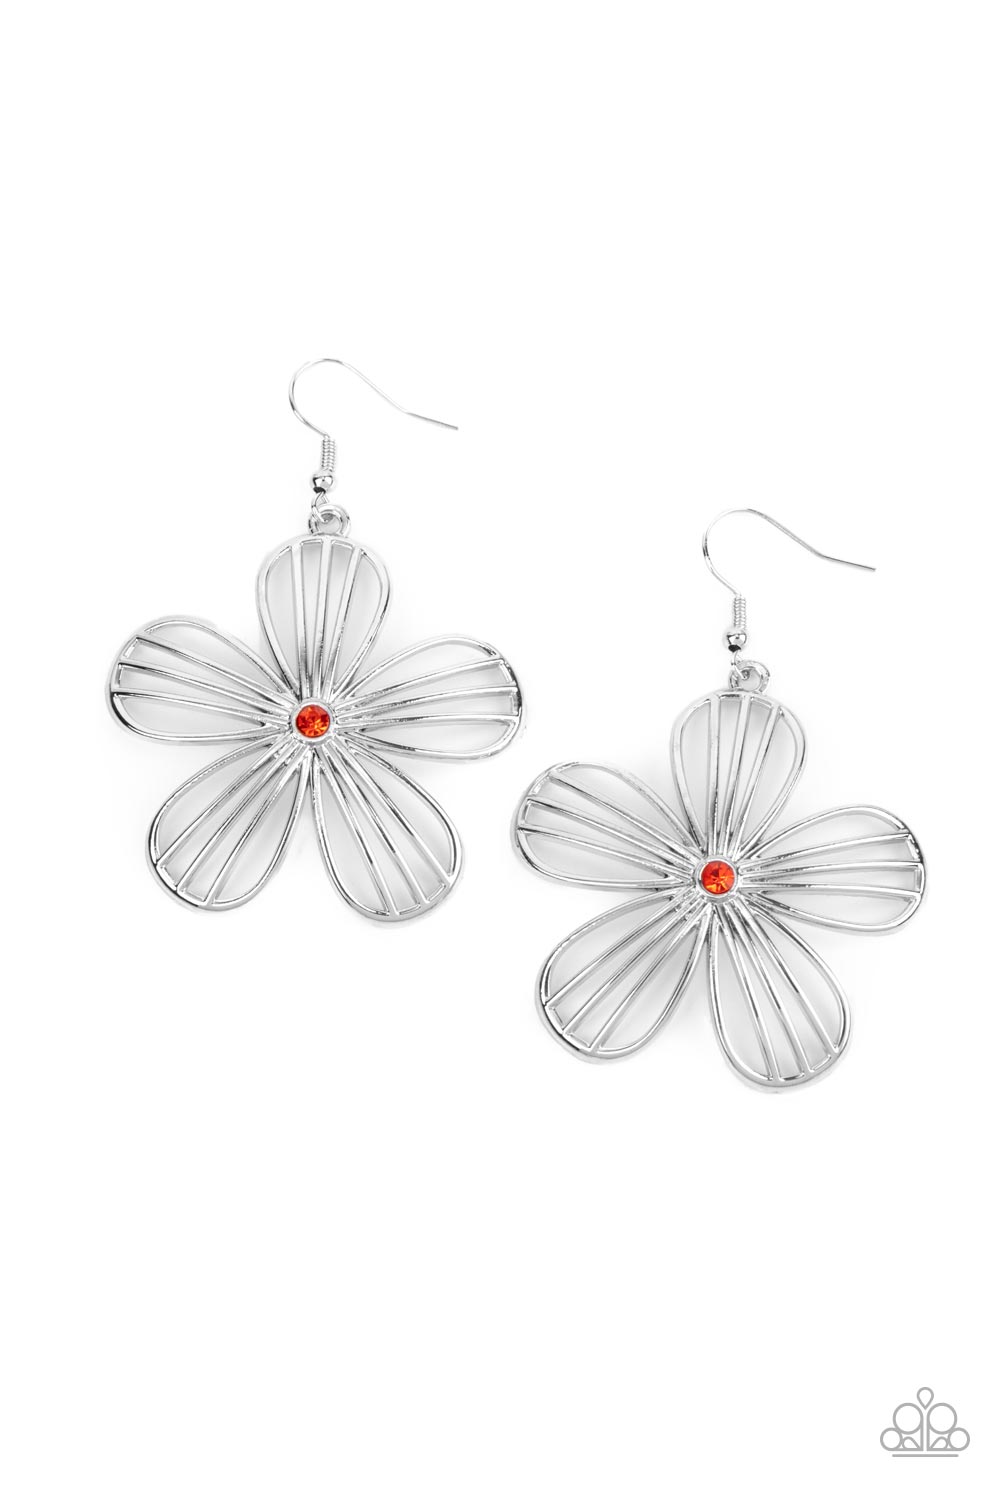 Meadow Musical - Orange and Silver Earrings - Paparazzi Accessories - Dainty orange rhinestone and airy silver petals streaked with linear bars bloom into an enchanting floral frame. Earring attaches to a standard fishhook fitting.